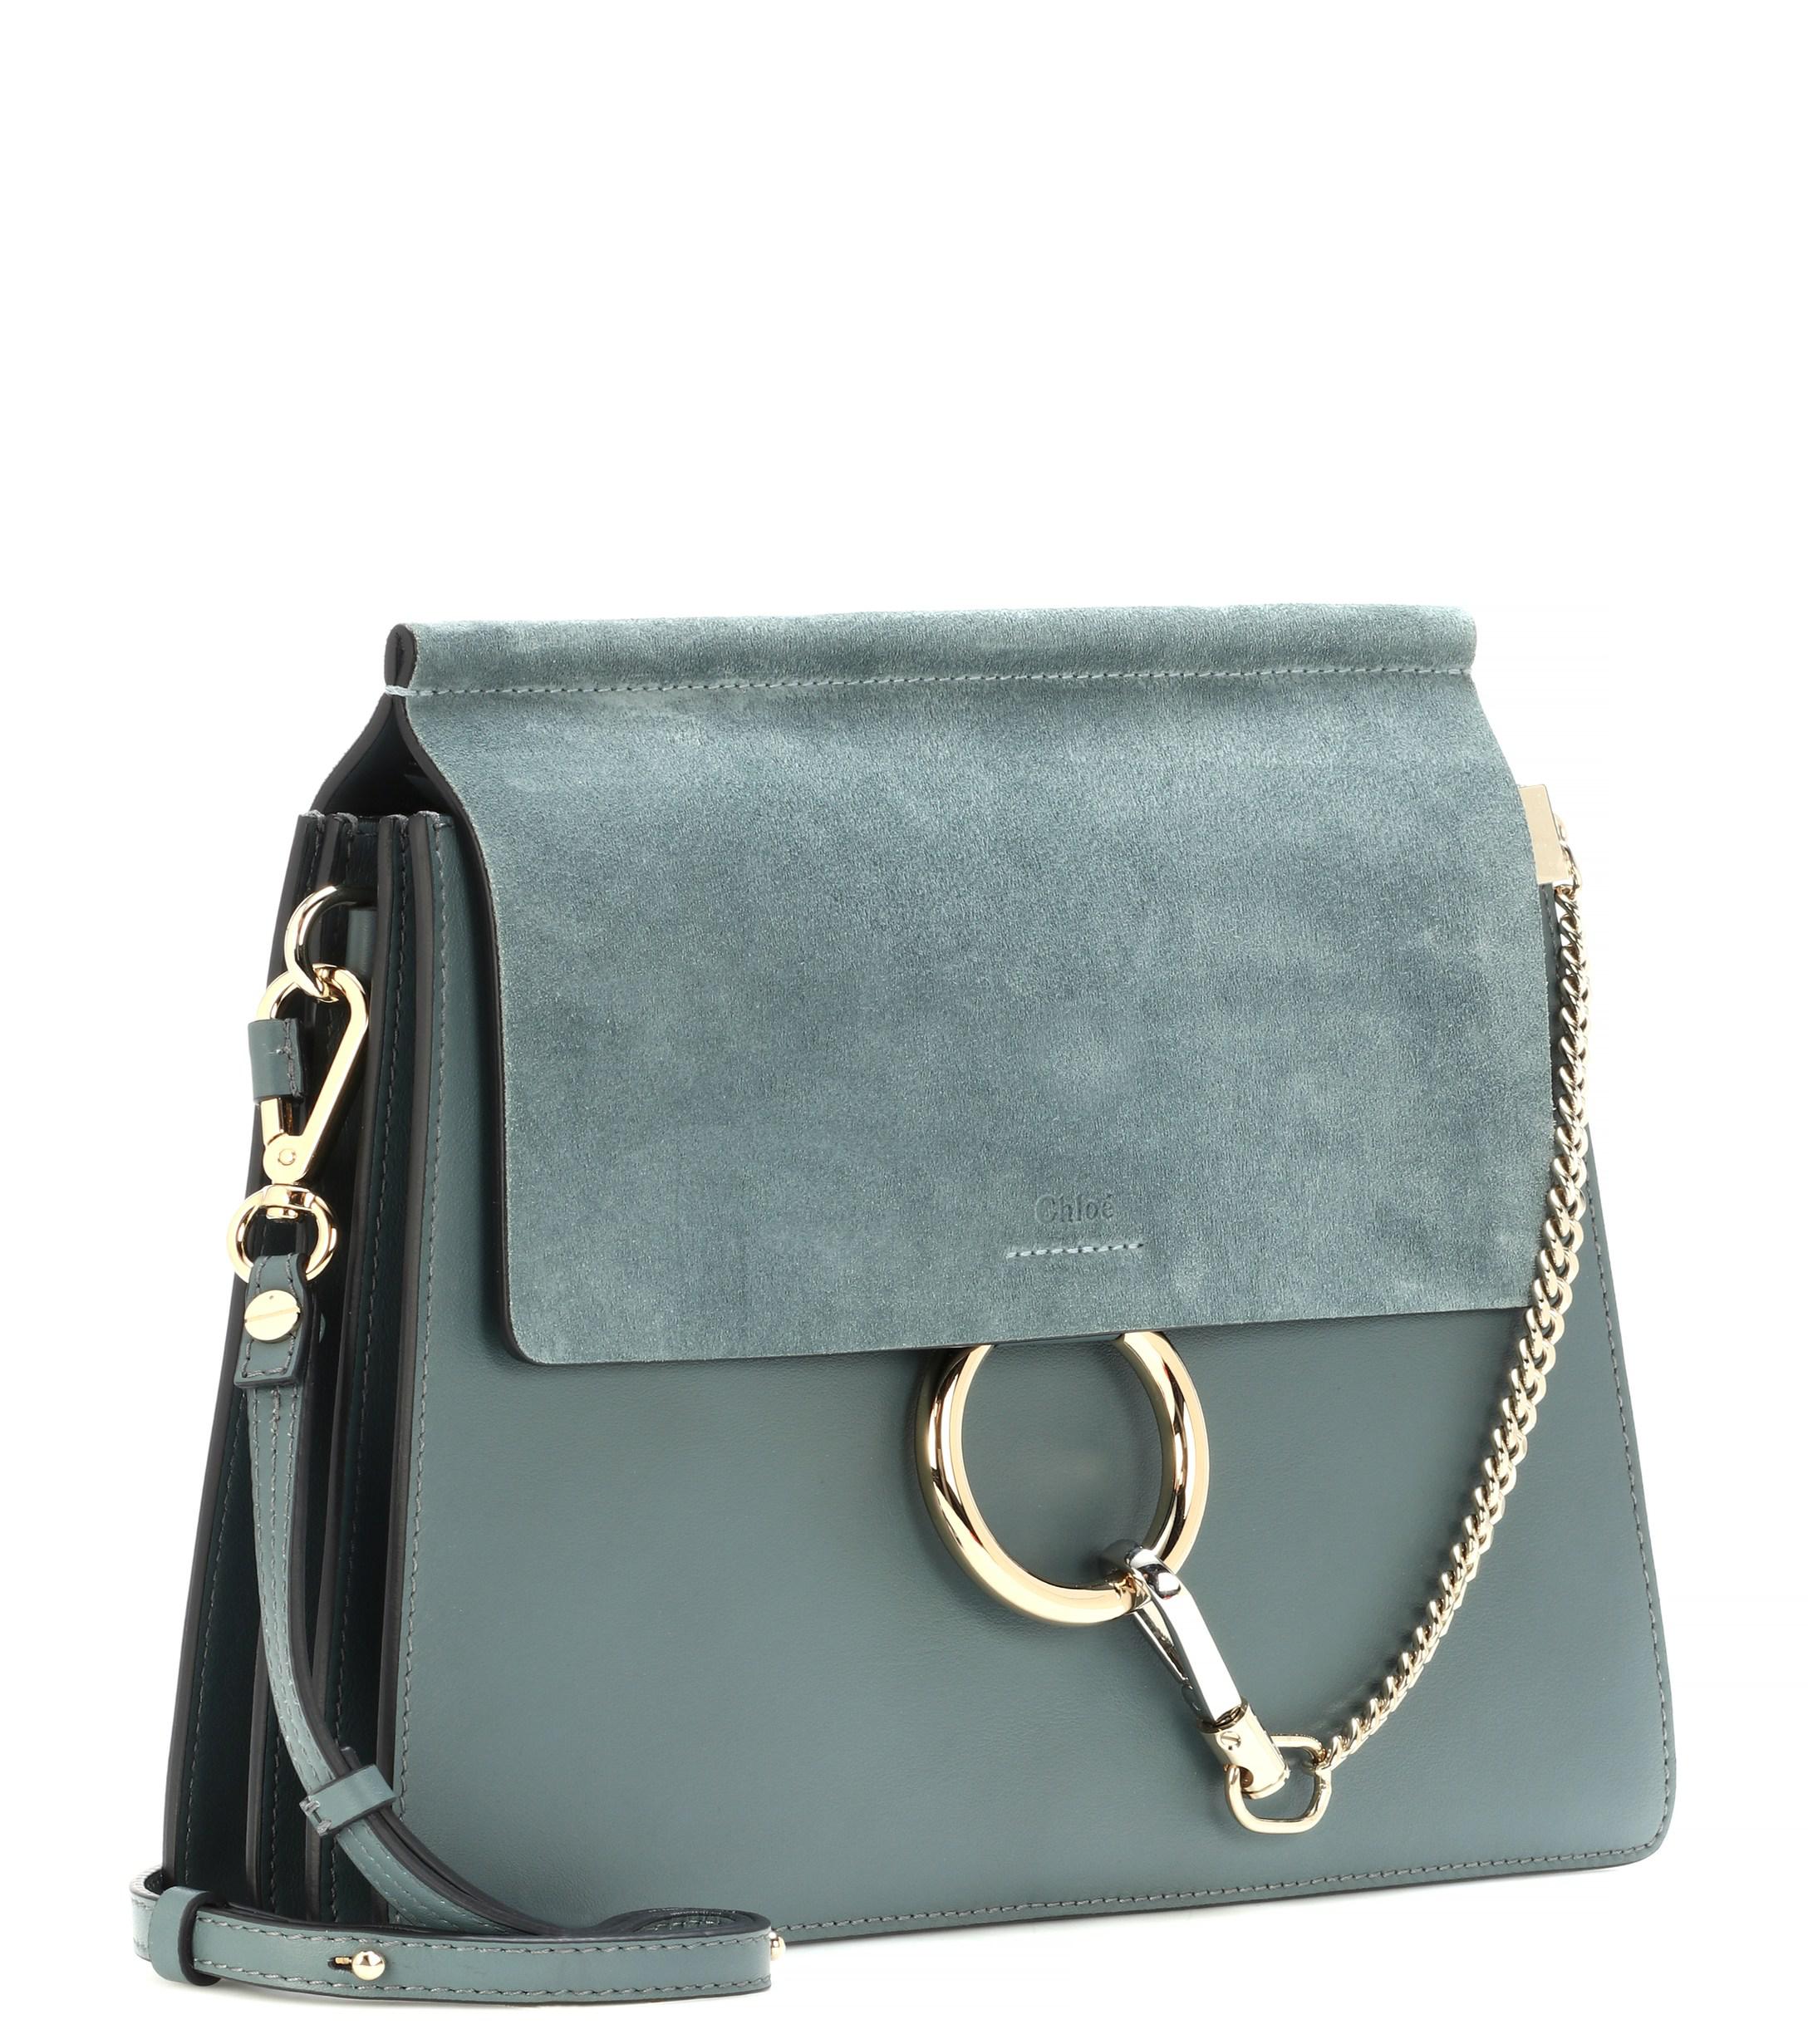 Chloé Faye Leather And Suede Shoulder Bag in Blue - Lyst